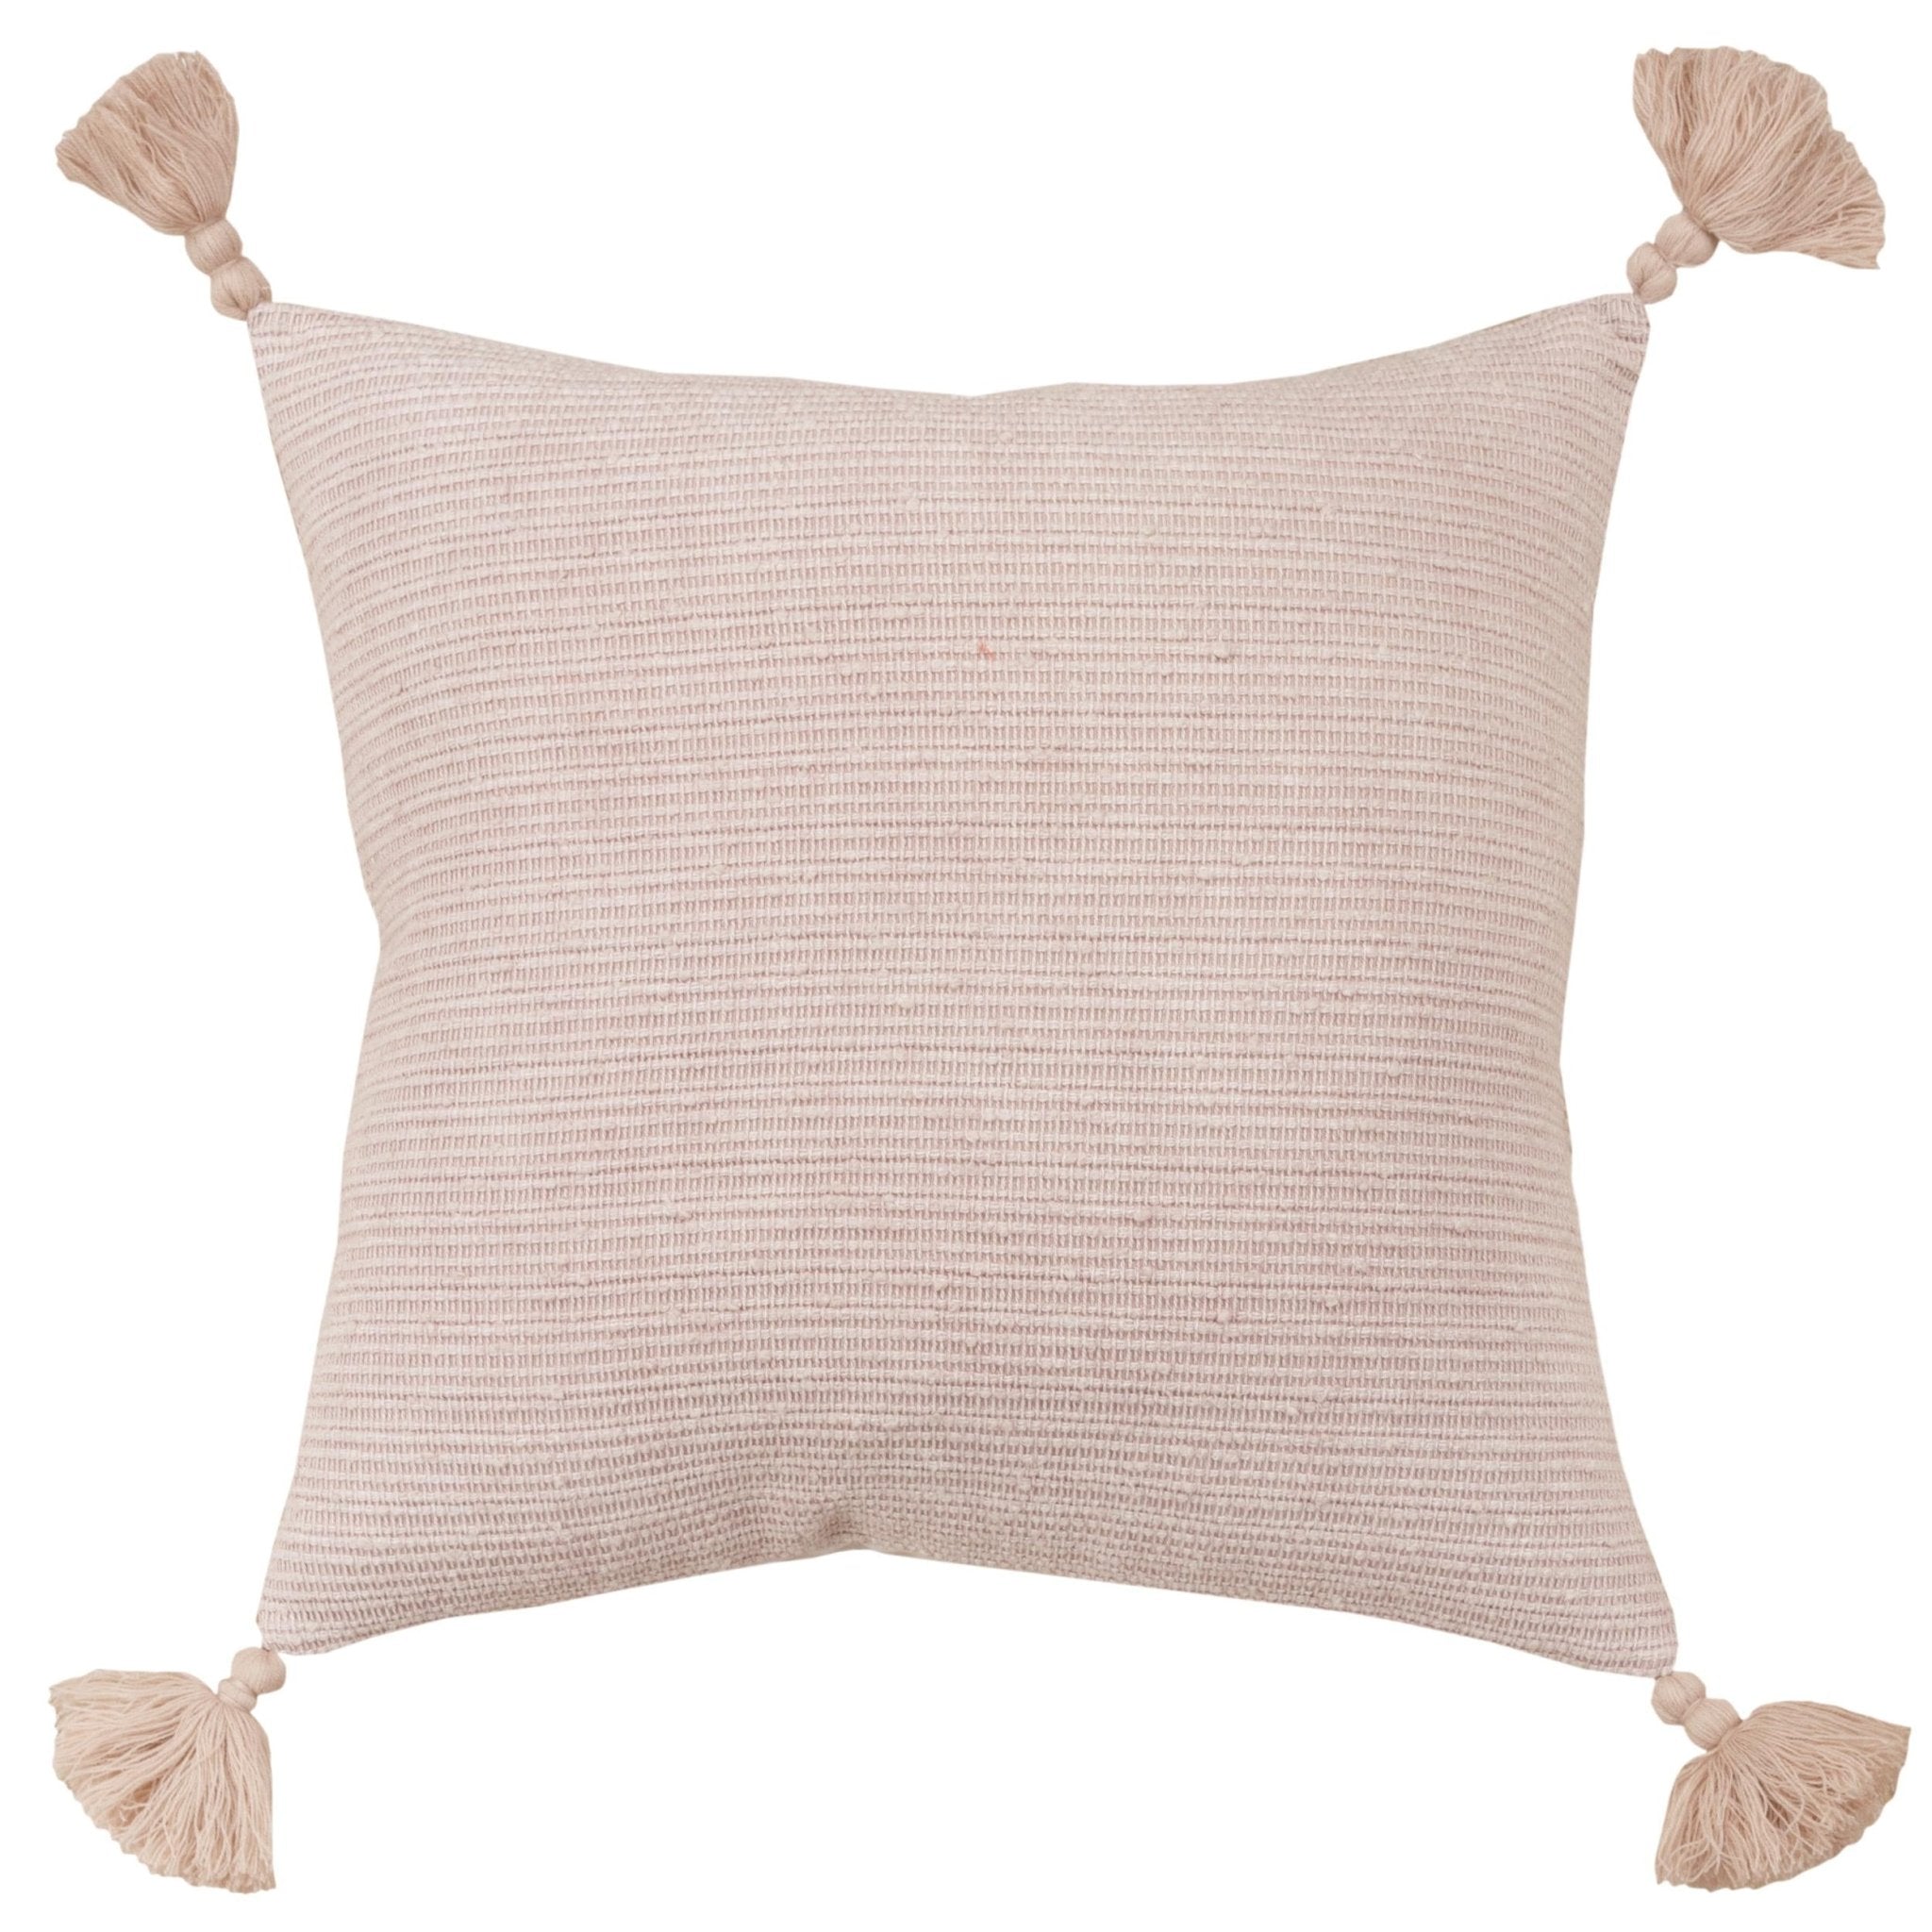 Knife Edged Woven Cotton Solid Stripe Pillow Cover - Decorative Pillows